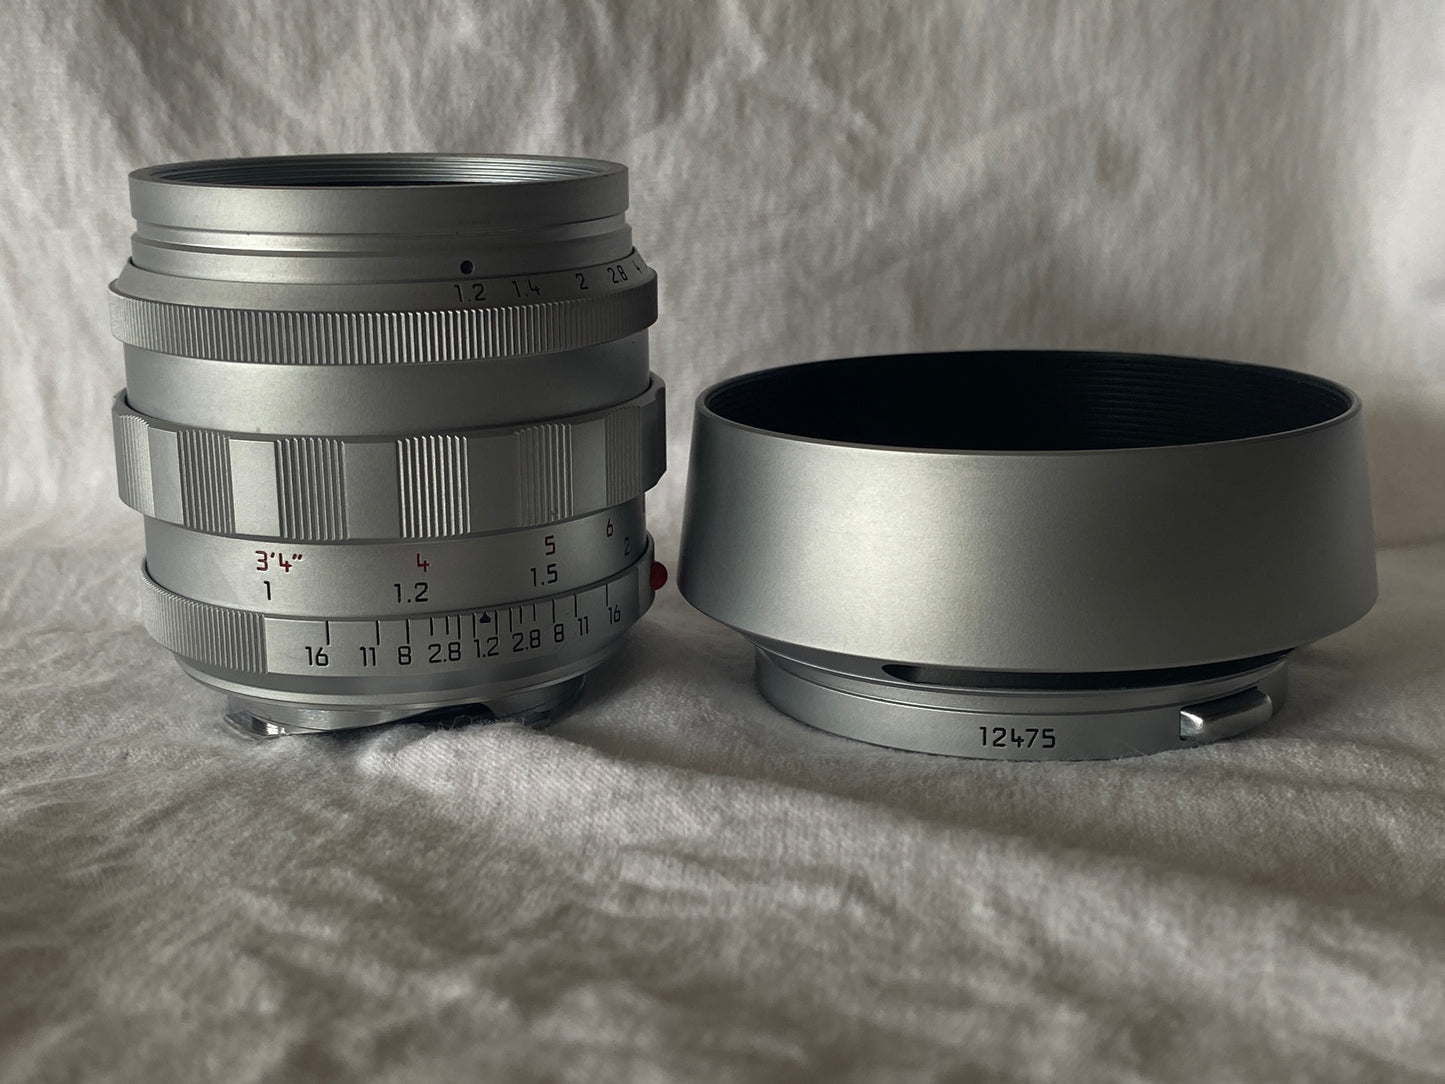 Leica 50mm F1.2 ASPH repainted in silver chrome